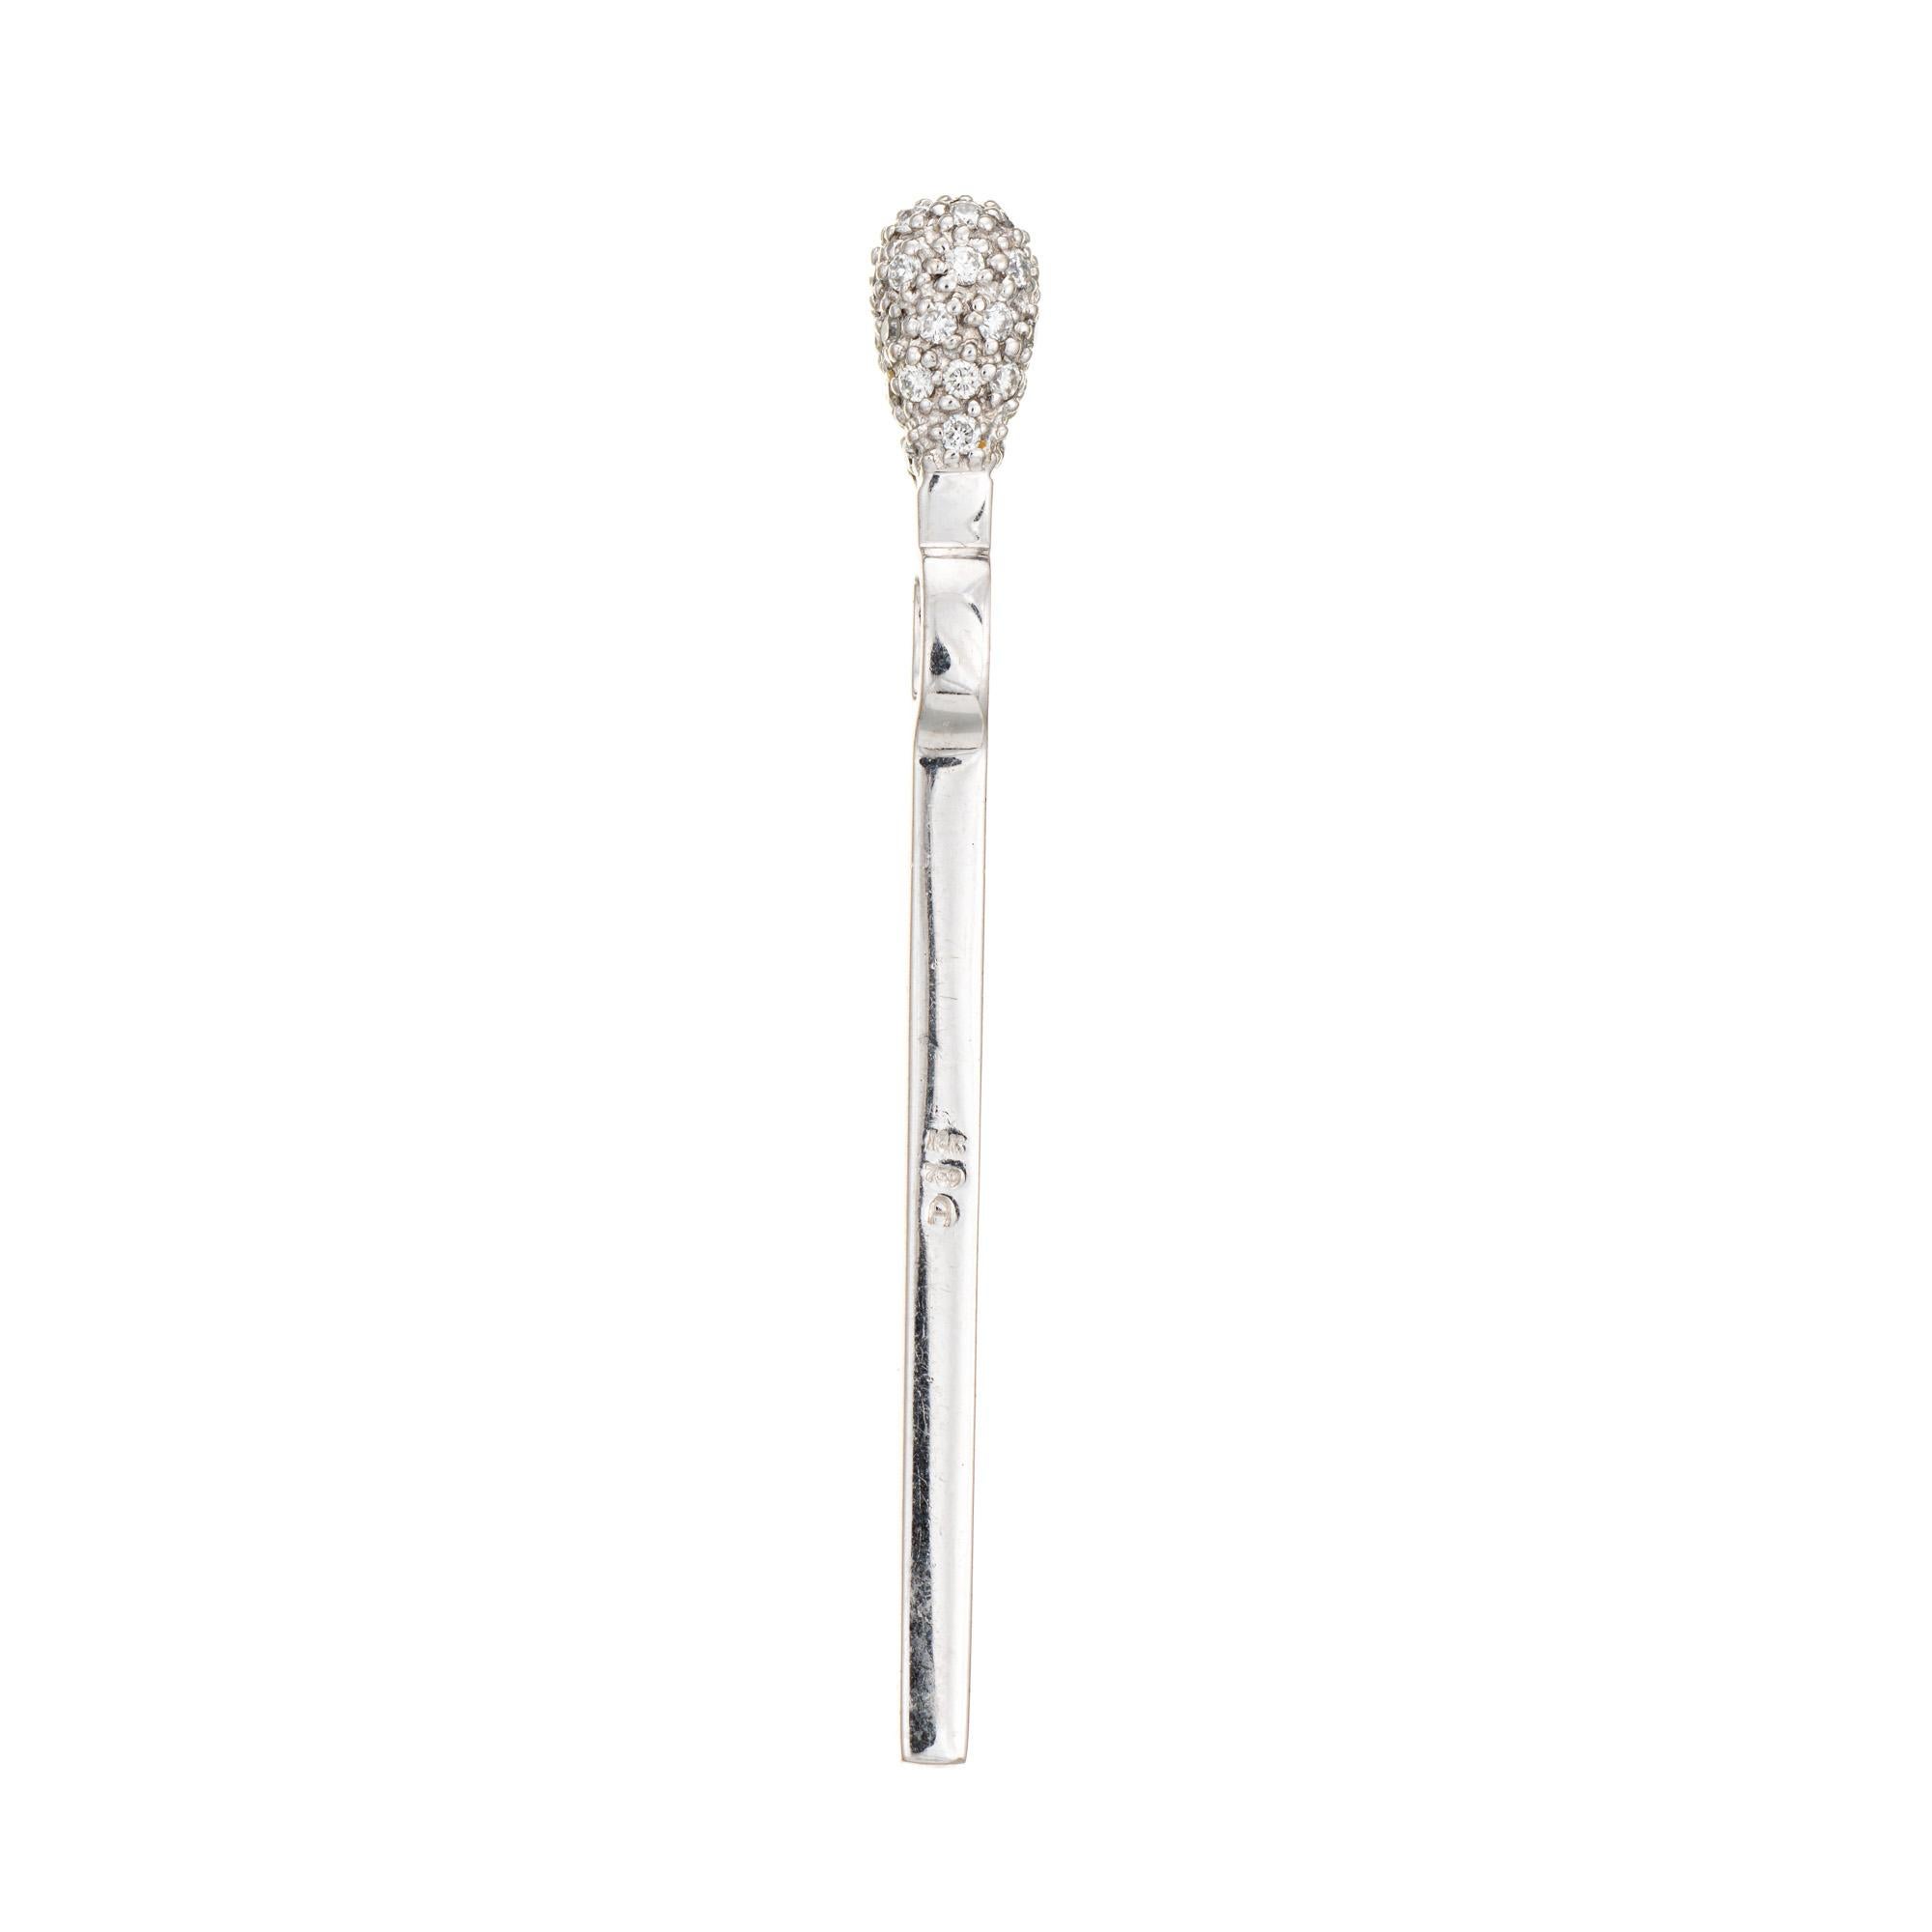 Finely detailed vintage diamond matchstick charm crafted in 18k white gold. 

Pave set diamonds total an estimated 0.25 carats (estimated at H-I color and VS2-SI2 clarity).

The playful charm highlights a diamond set matchstick tip. The piece can be